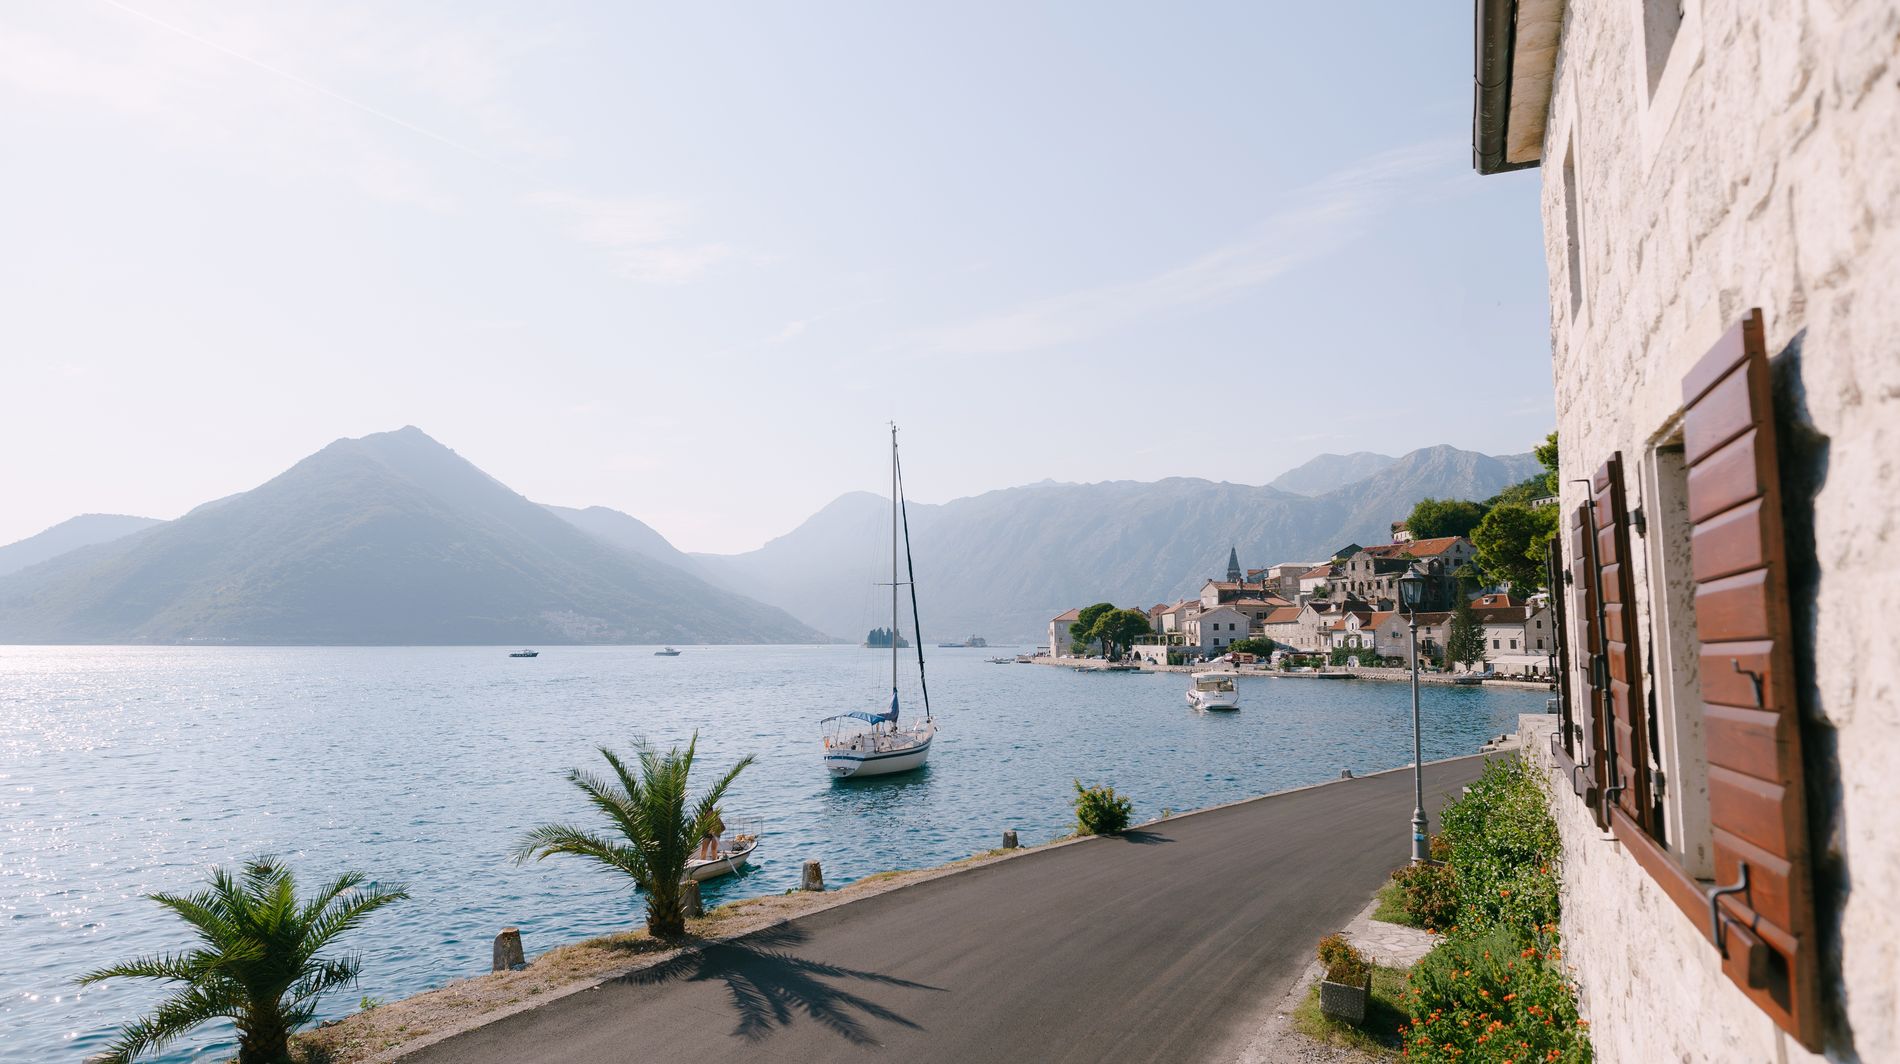 Perast coast with palm trees near the bay of kotor